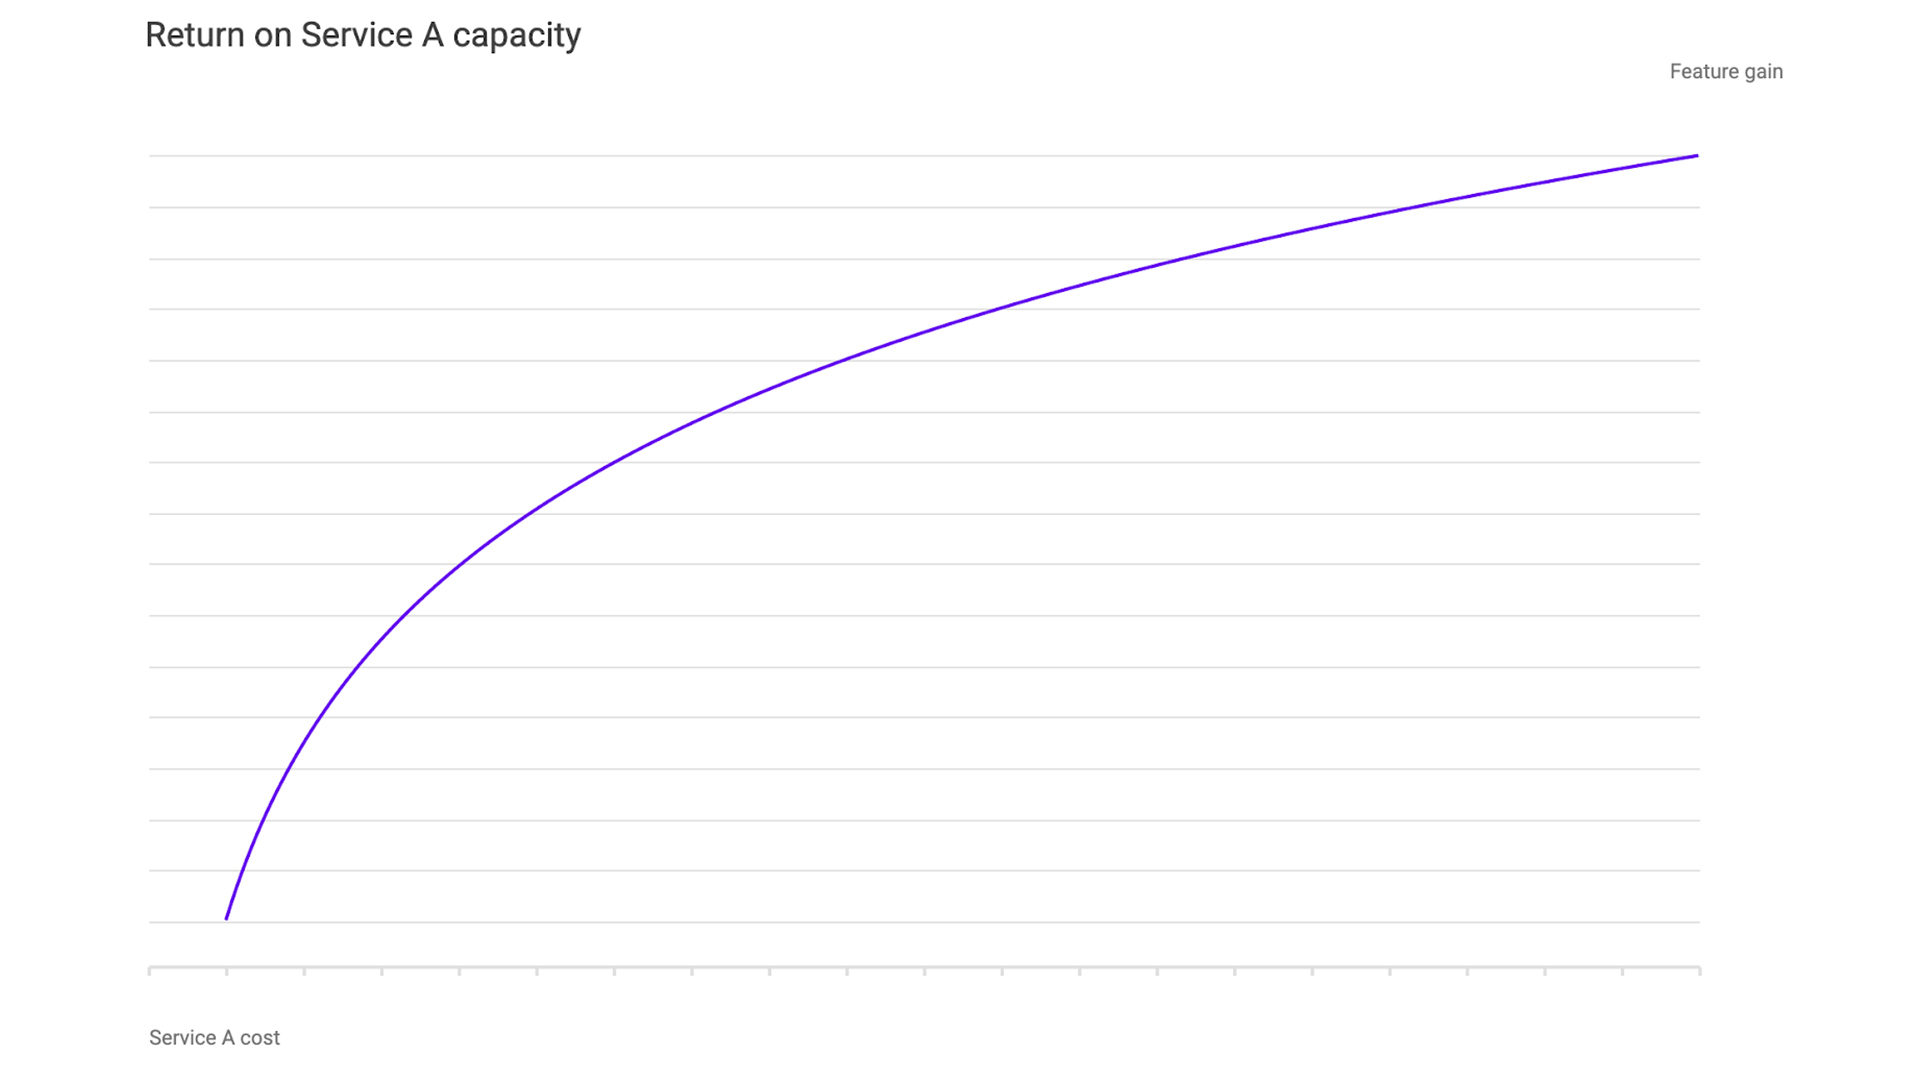 chart showing return on service A capacity